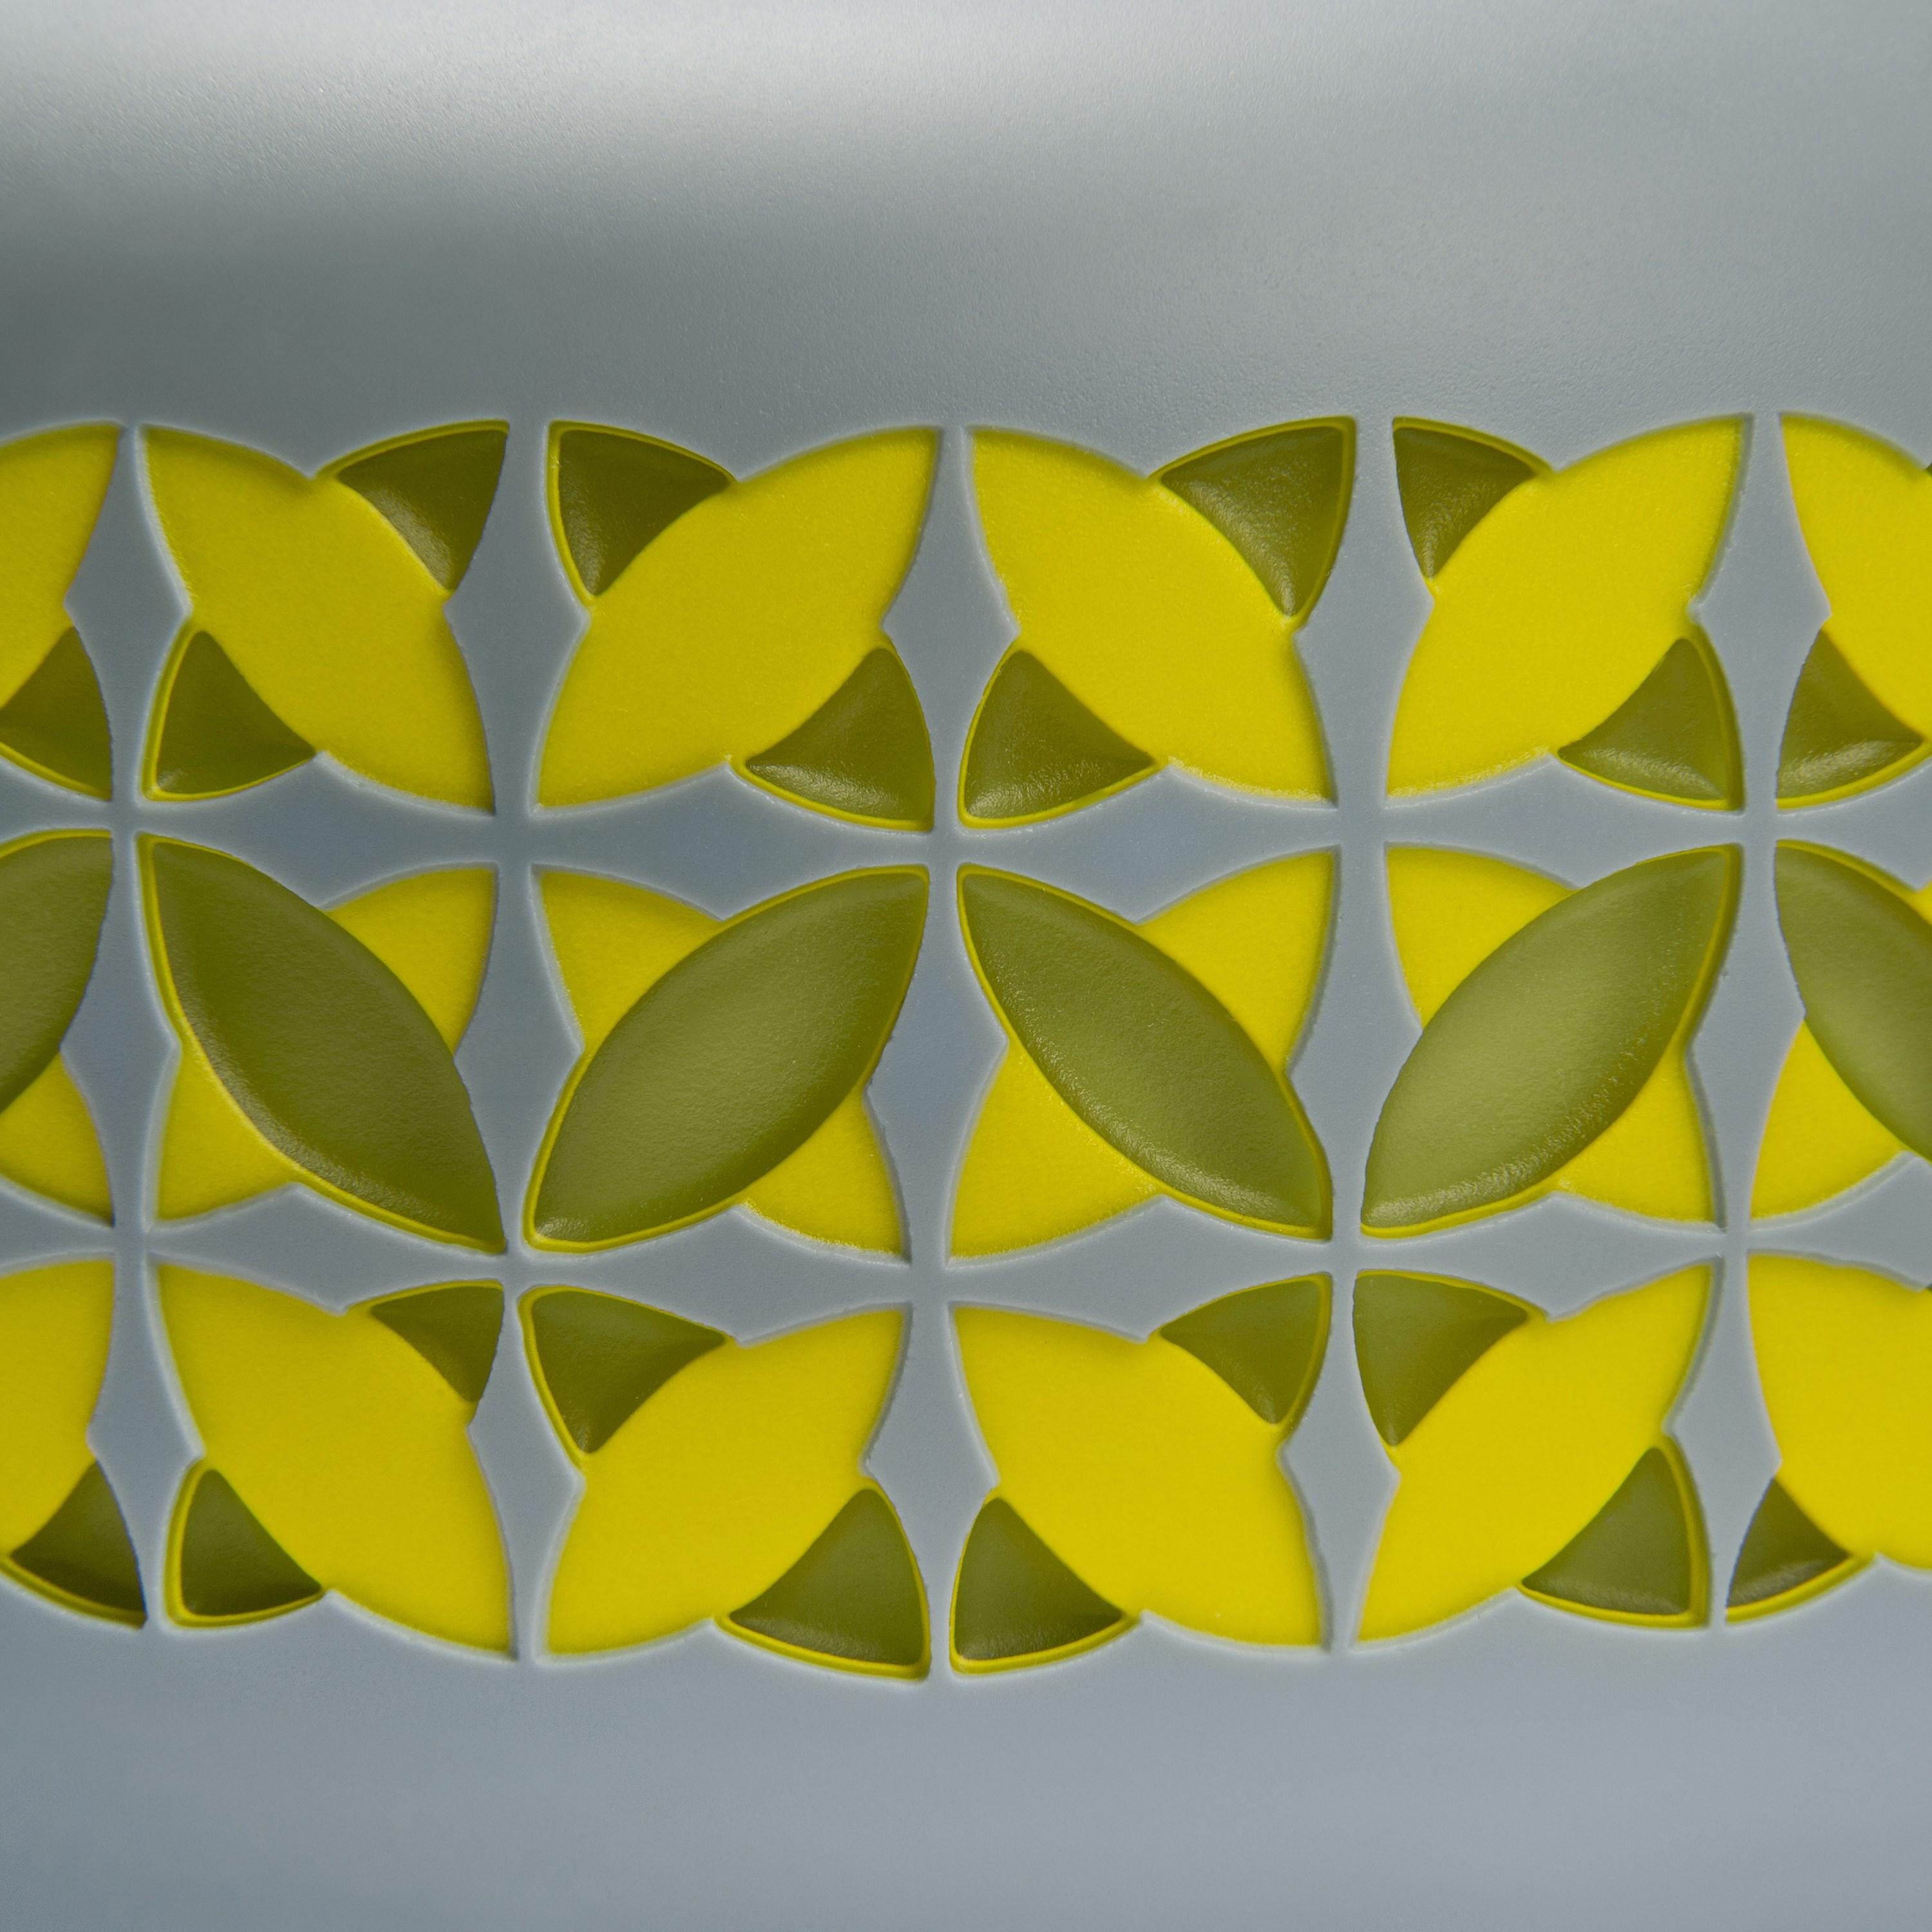 Hand-Crafted Going Round in Circles III, a Grey & Yellow Glass Artwork by Sarah Wiberley For Sale